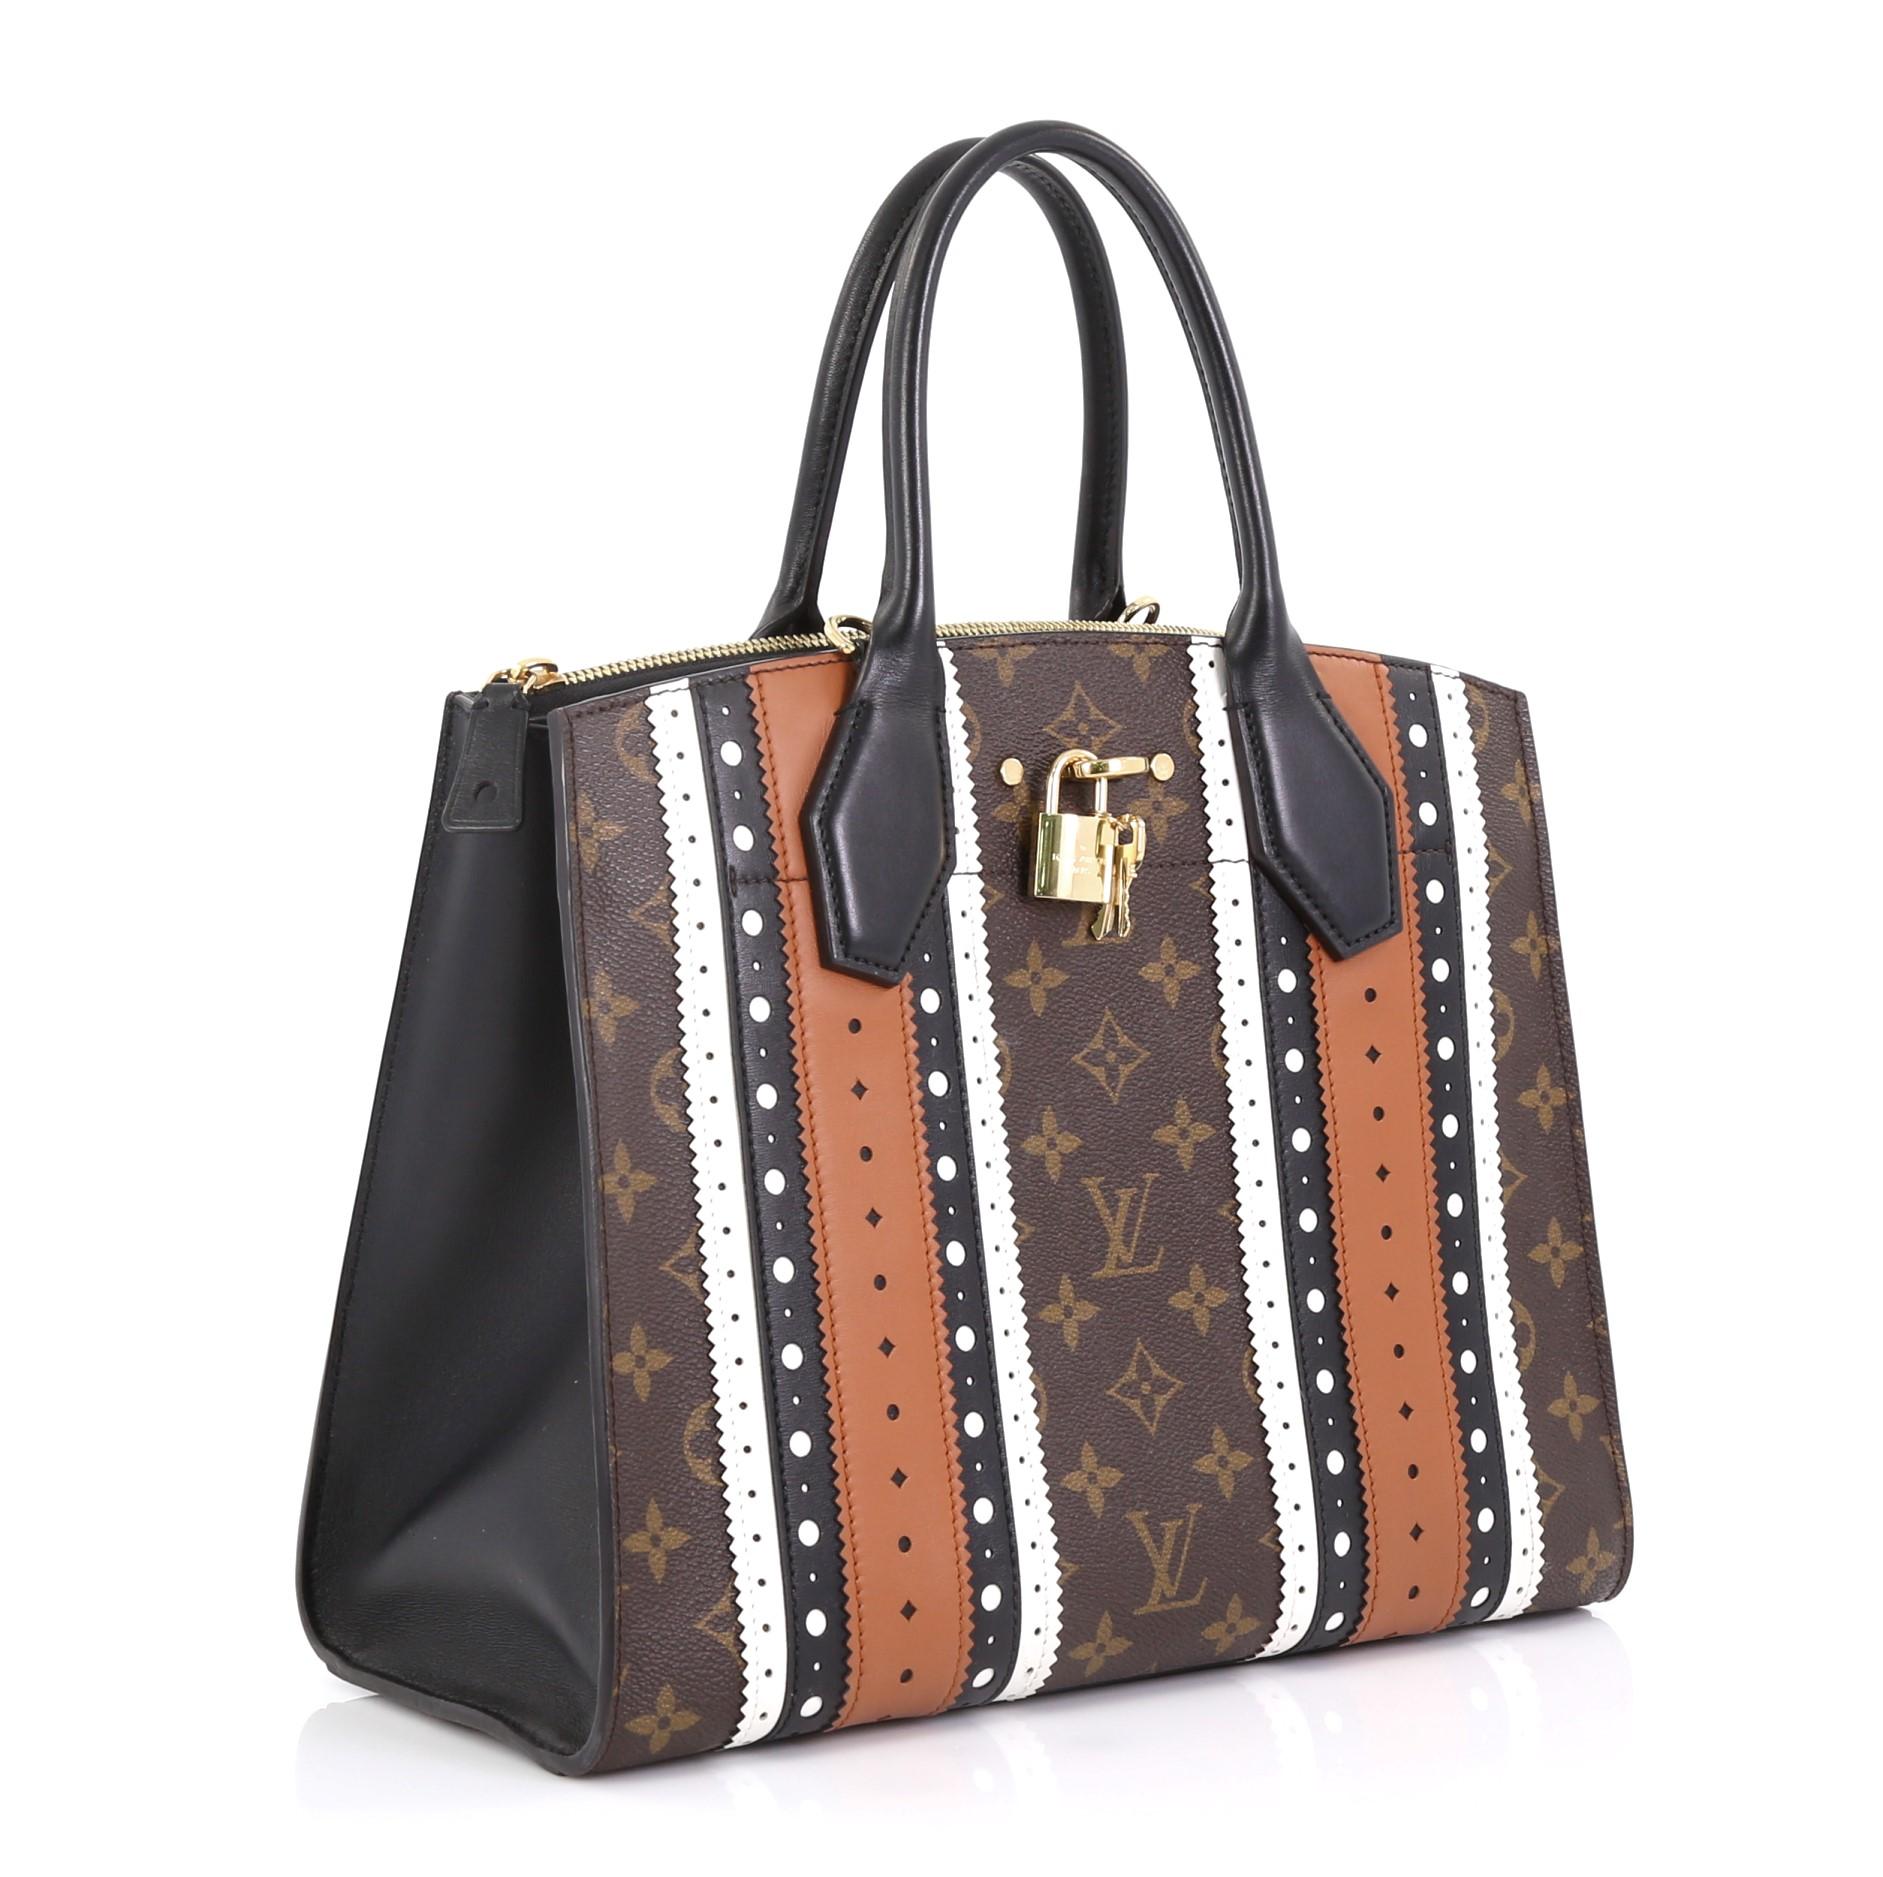 This Louis Vuitton City Steamer Handbag Limited Edition Brogue Monogram Canvas and Leather MM, crafted in brogue monogram coated canvas and leather, features dual-rolled leather handles, front central lock with LV stamped logo, and gold-tone